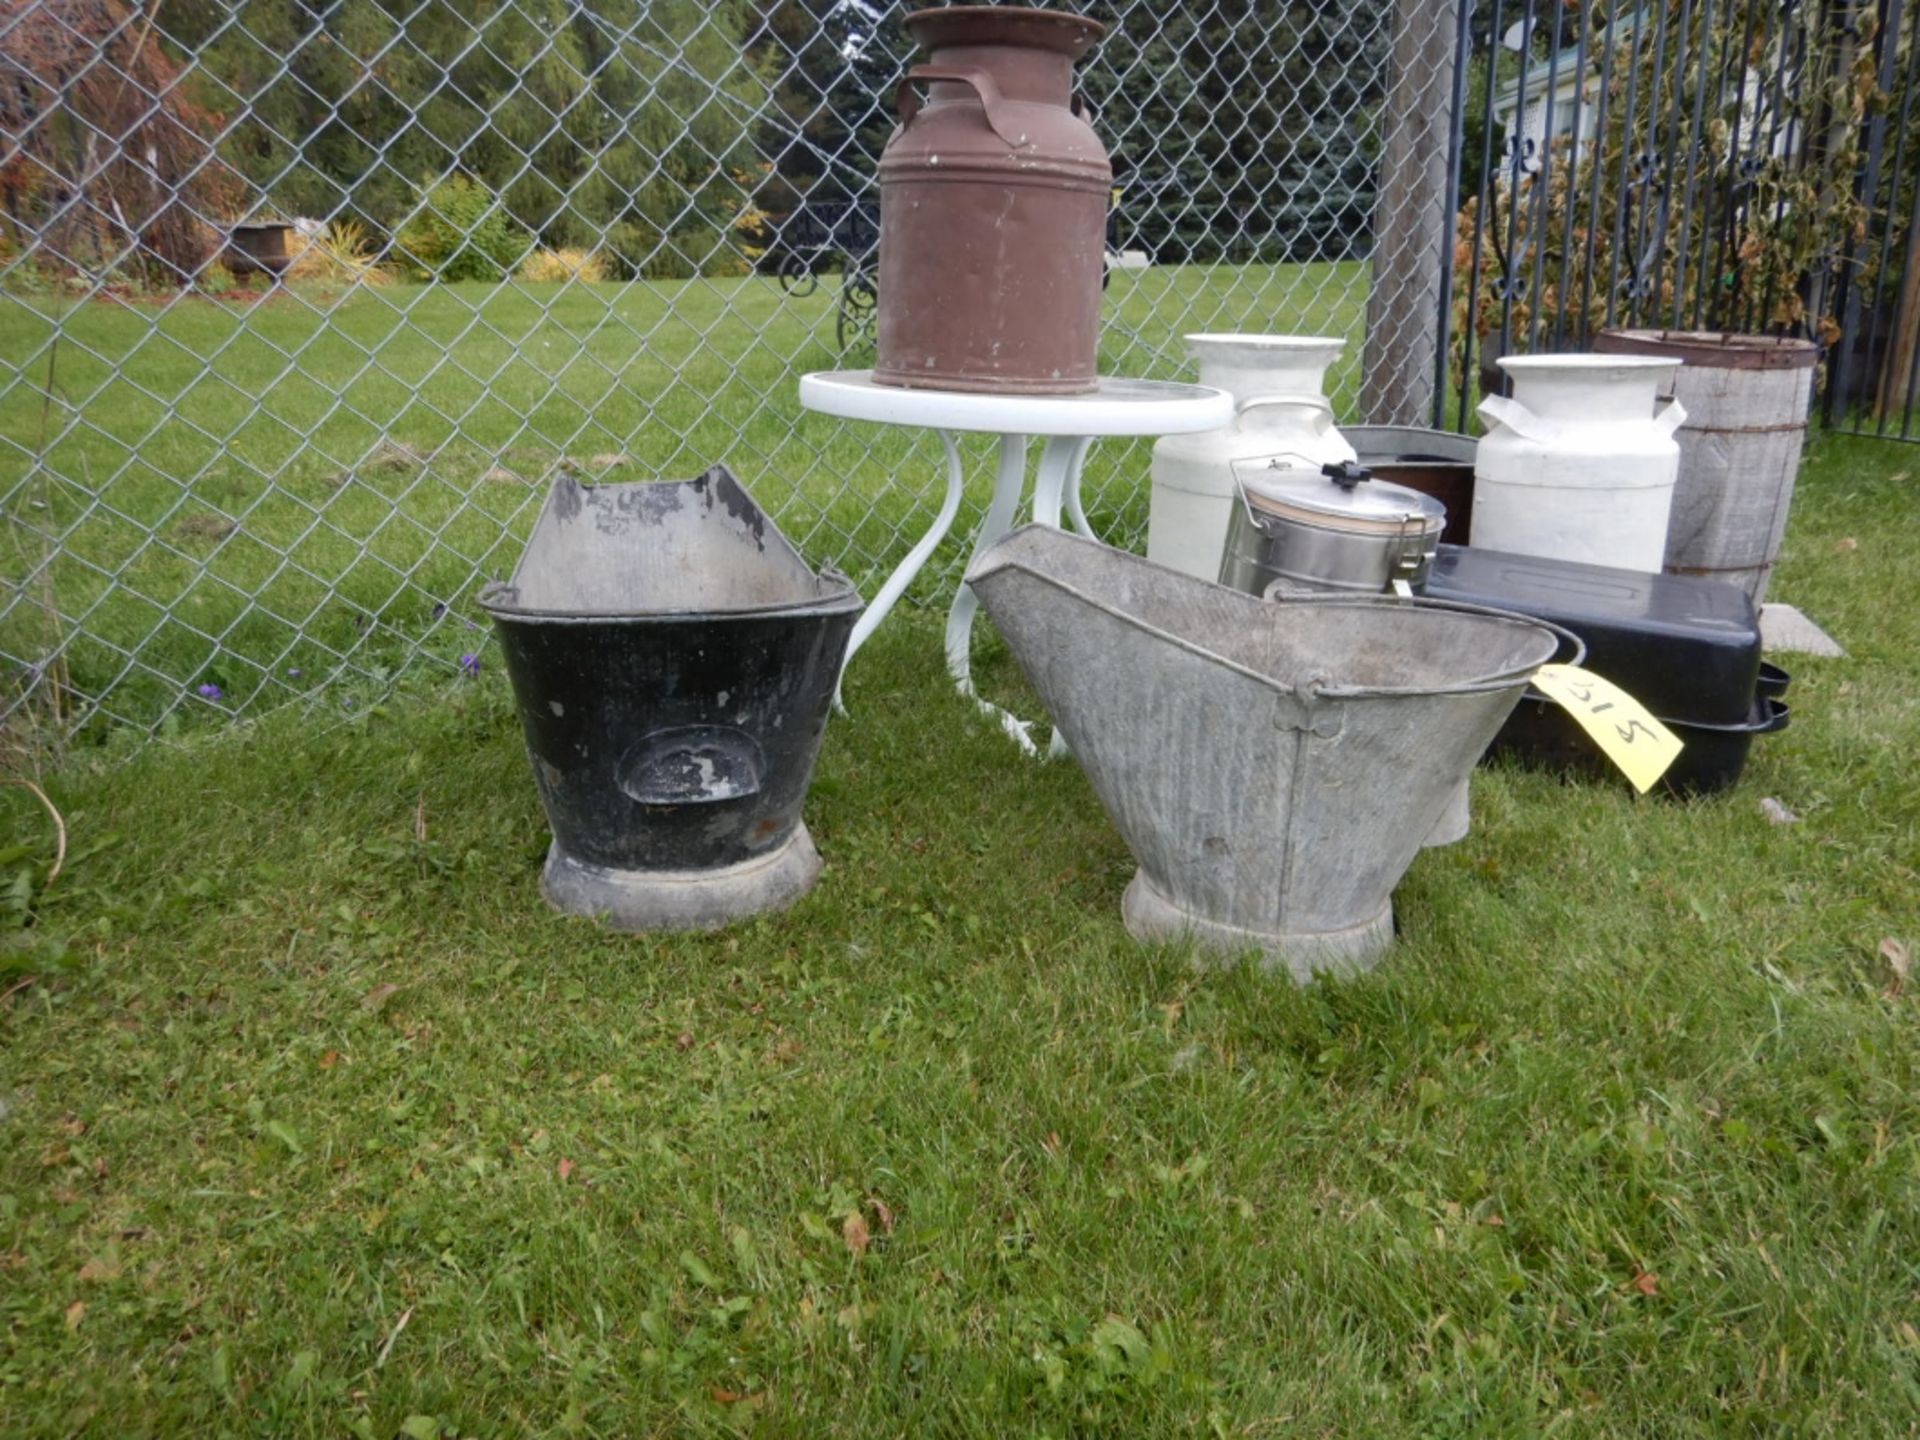 L/O ASSORTED COAL PAILS, CREAM CANS, COPPER WASH BOILER, LARGE ROASTER PAN, ETC - Image 2 of 4